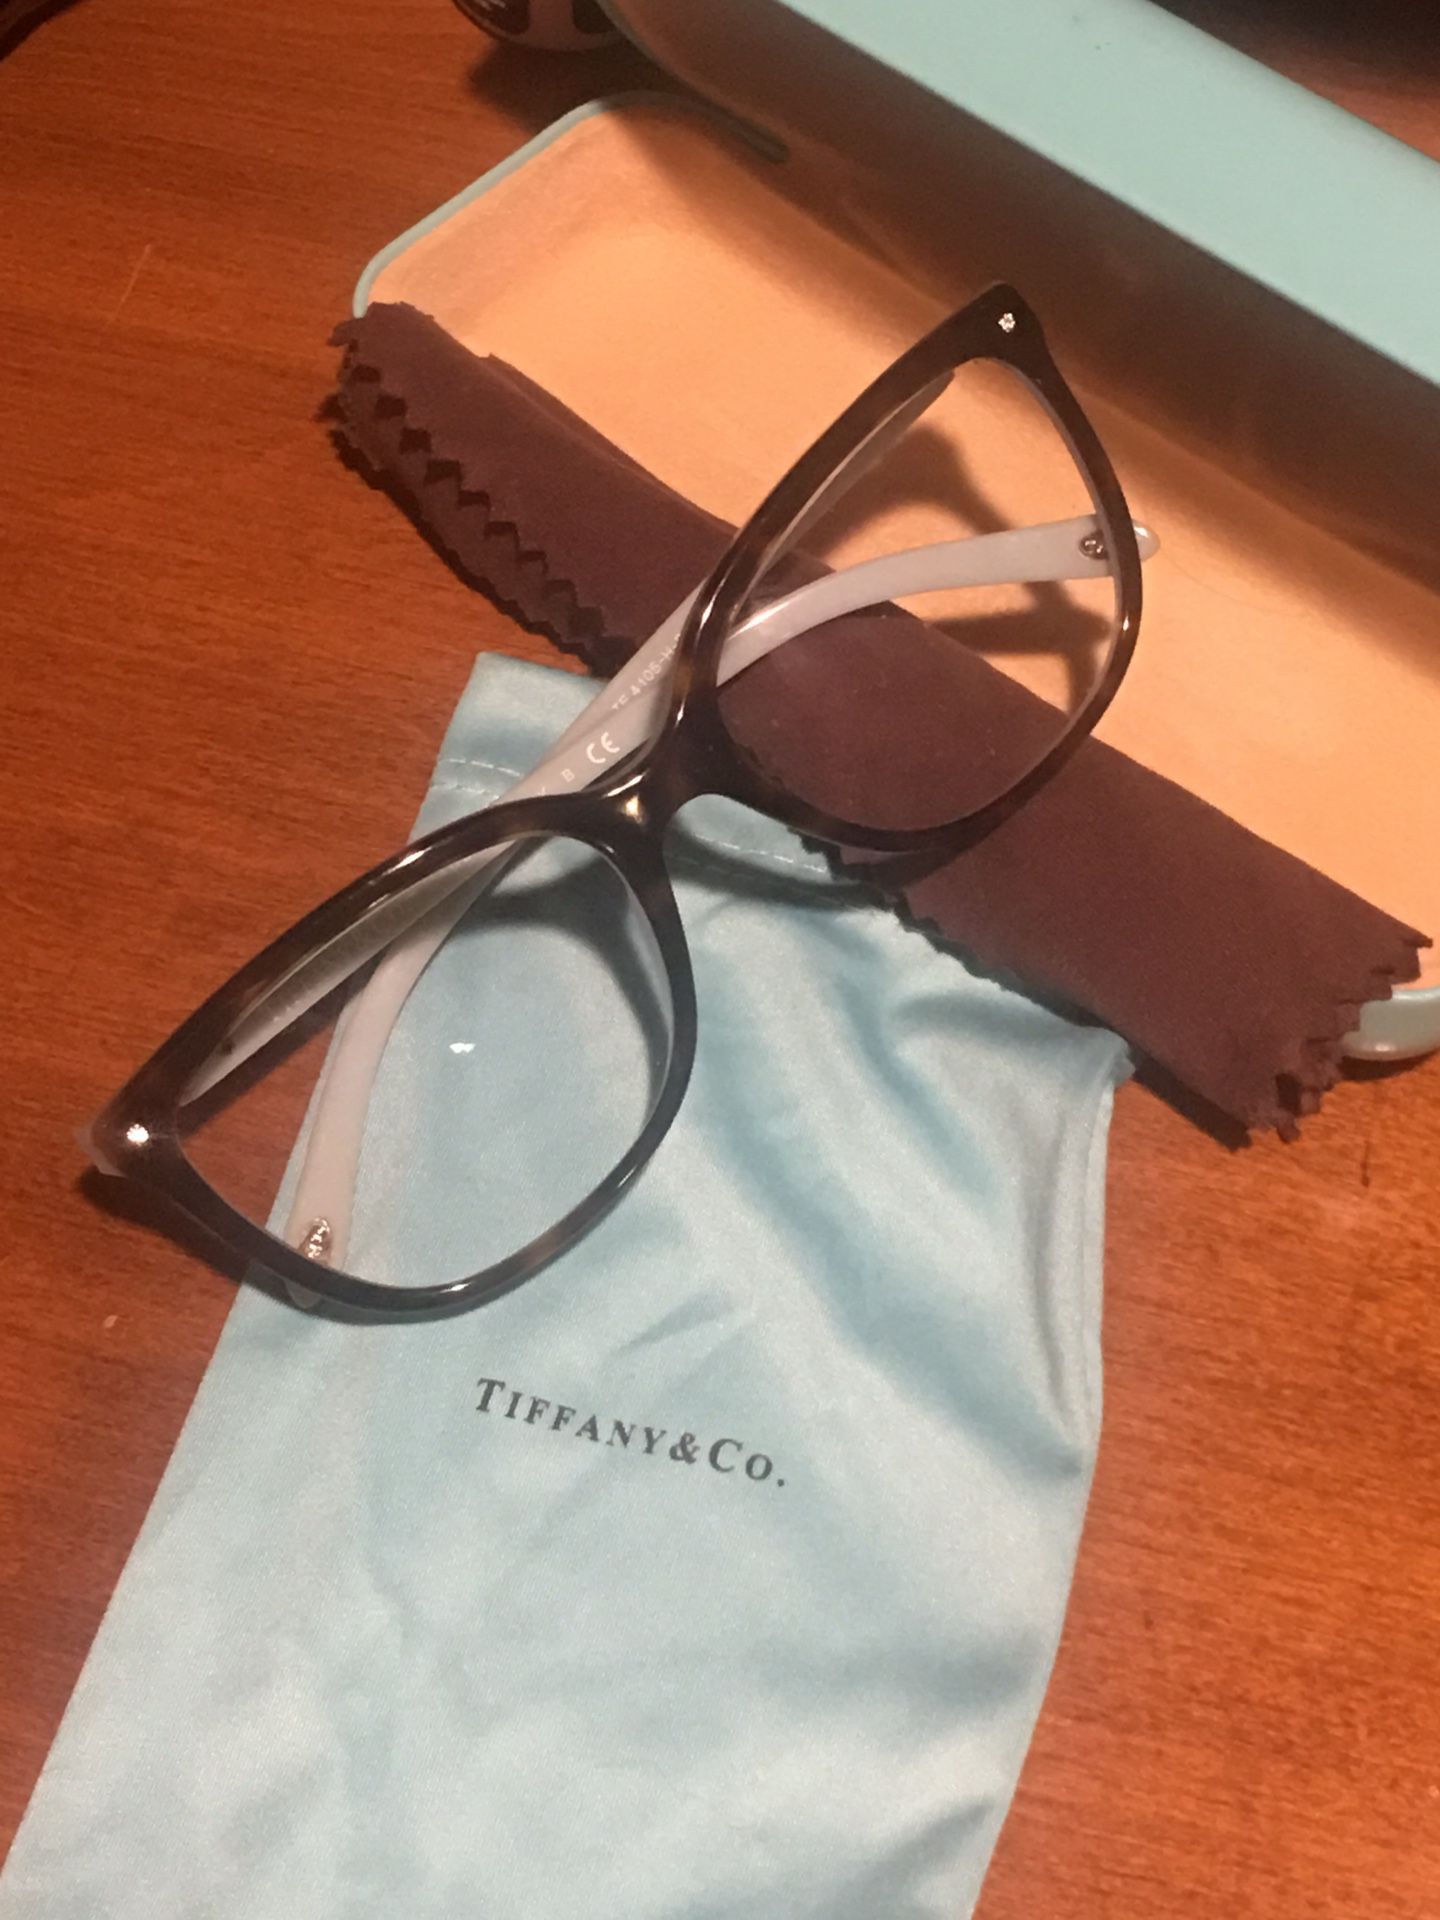 Tiffany and co glasses